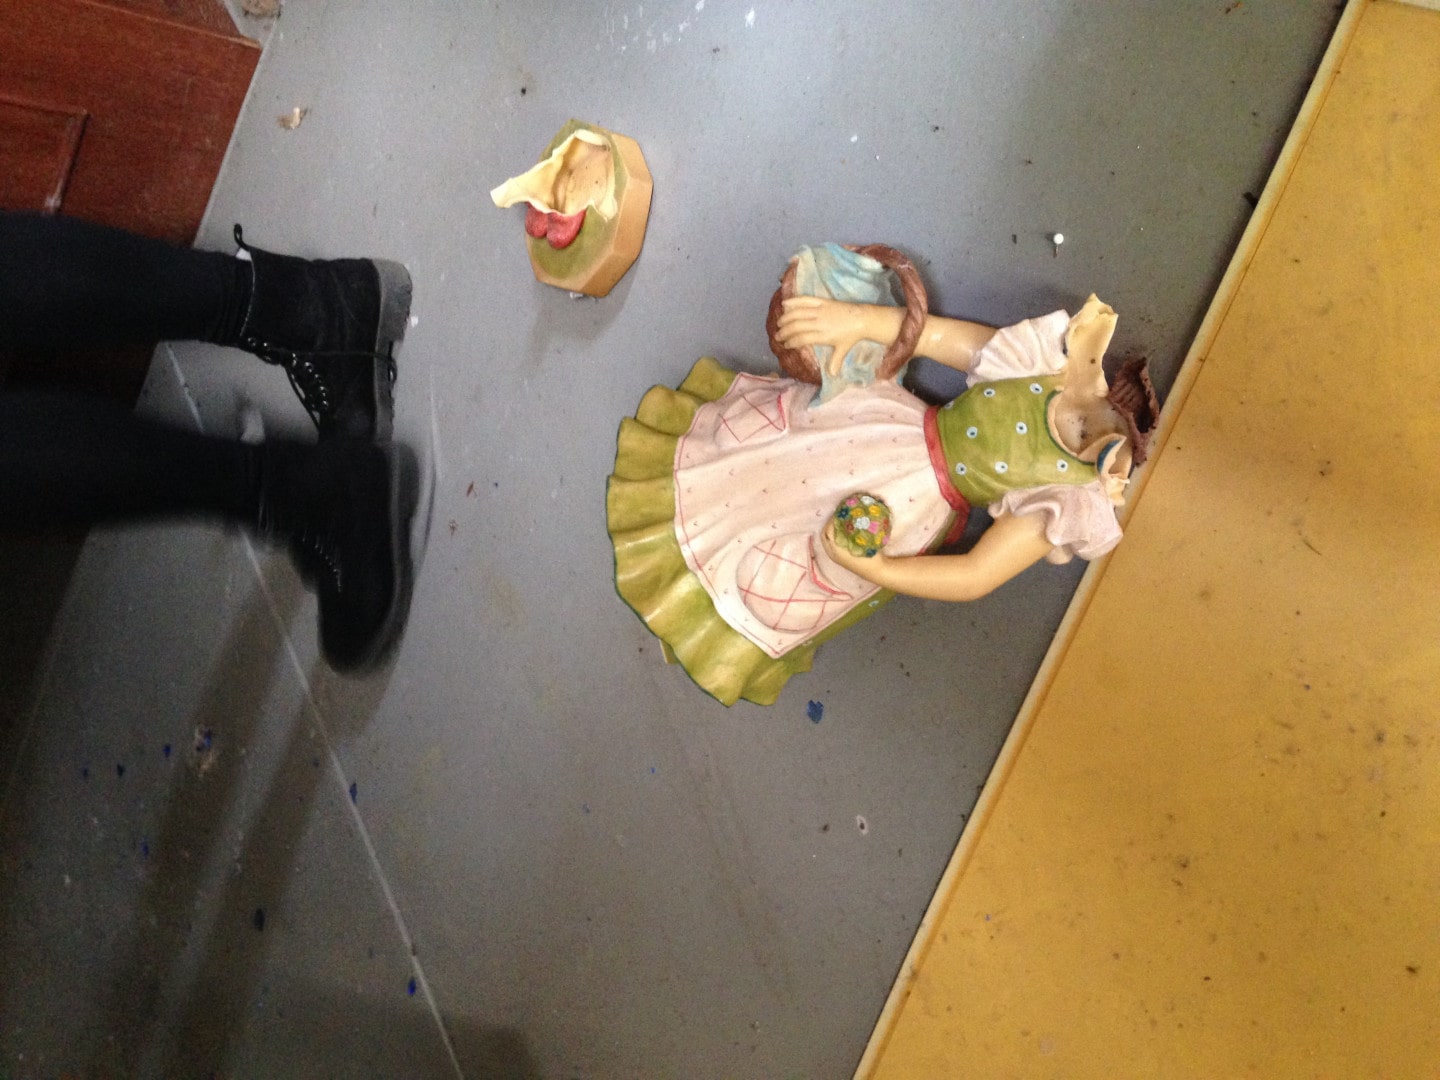 broken ceramic doll without head lying on the floor